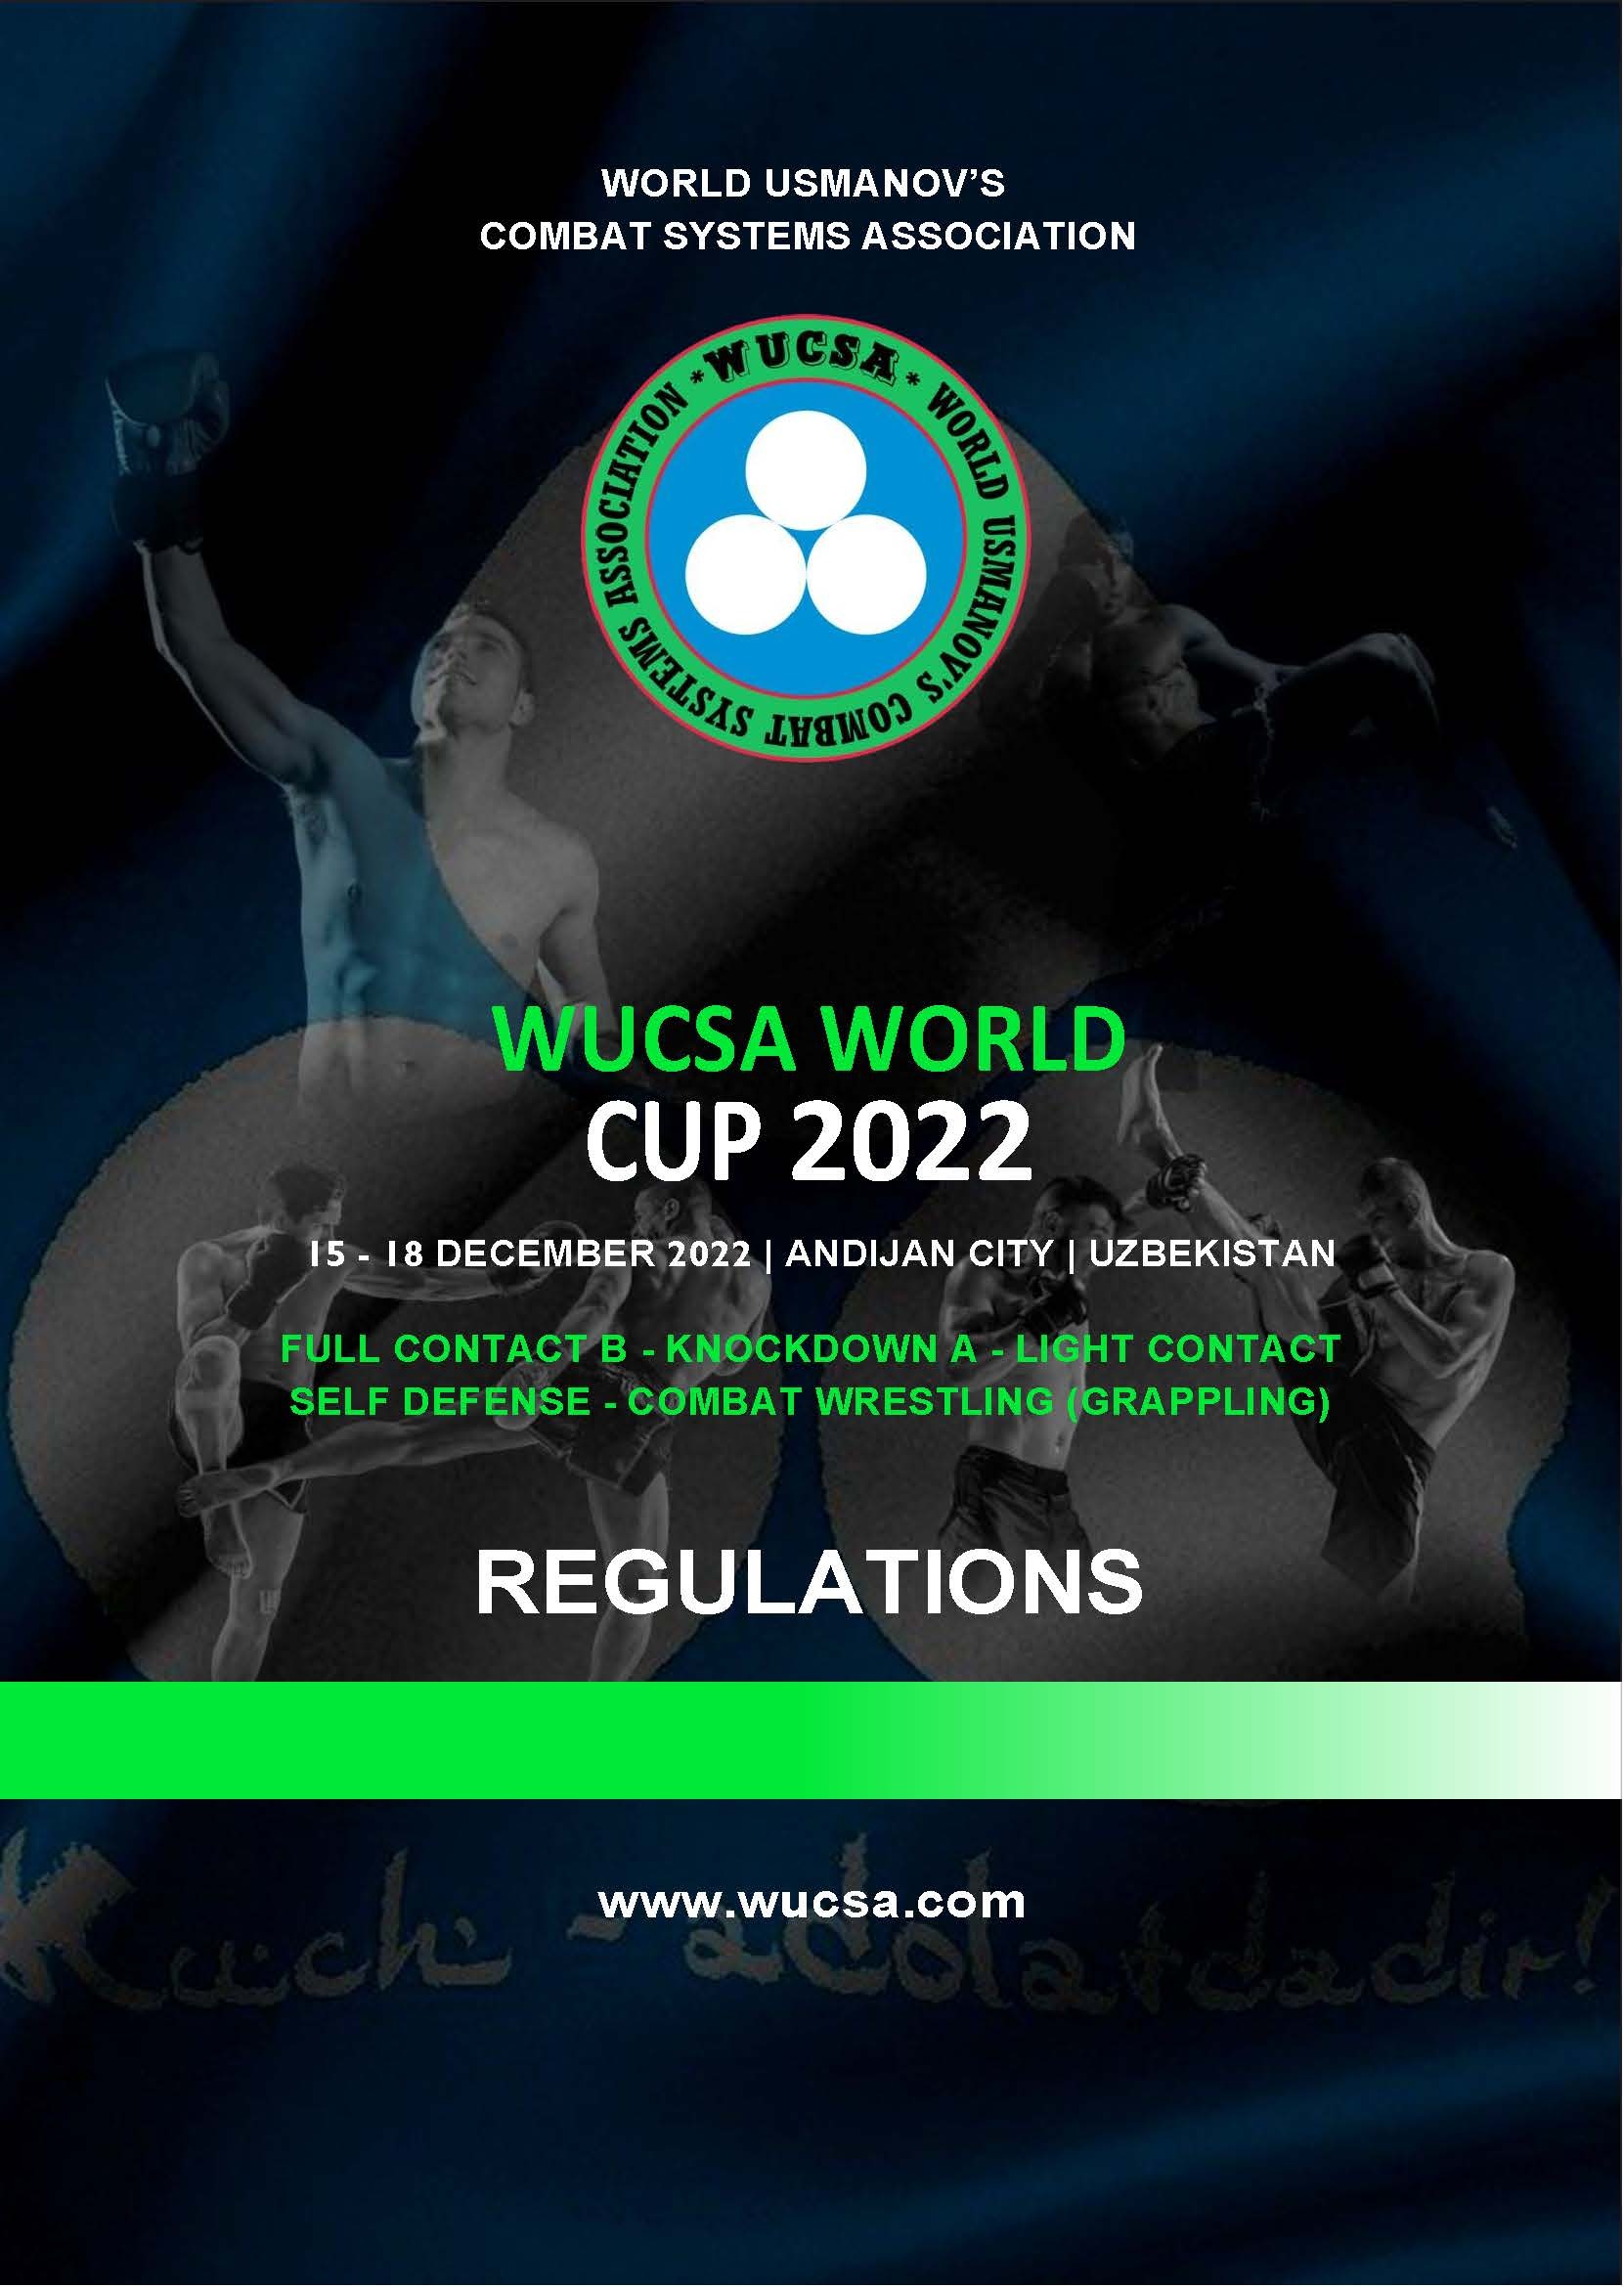 WUCSA WORLD CUP 2022 cover photo